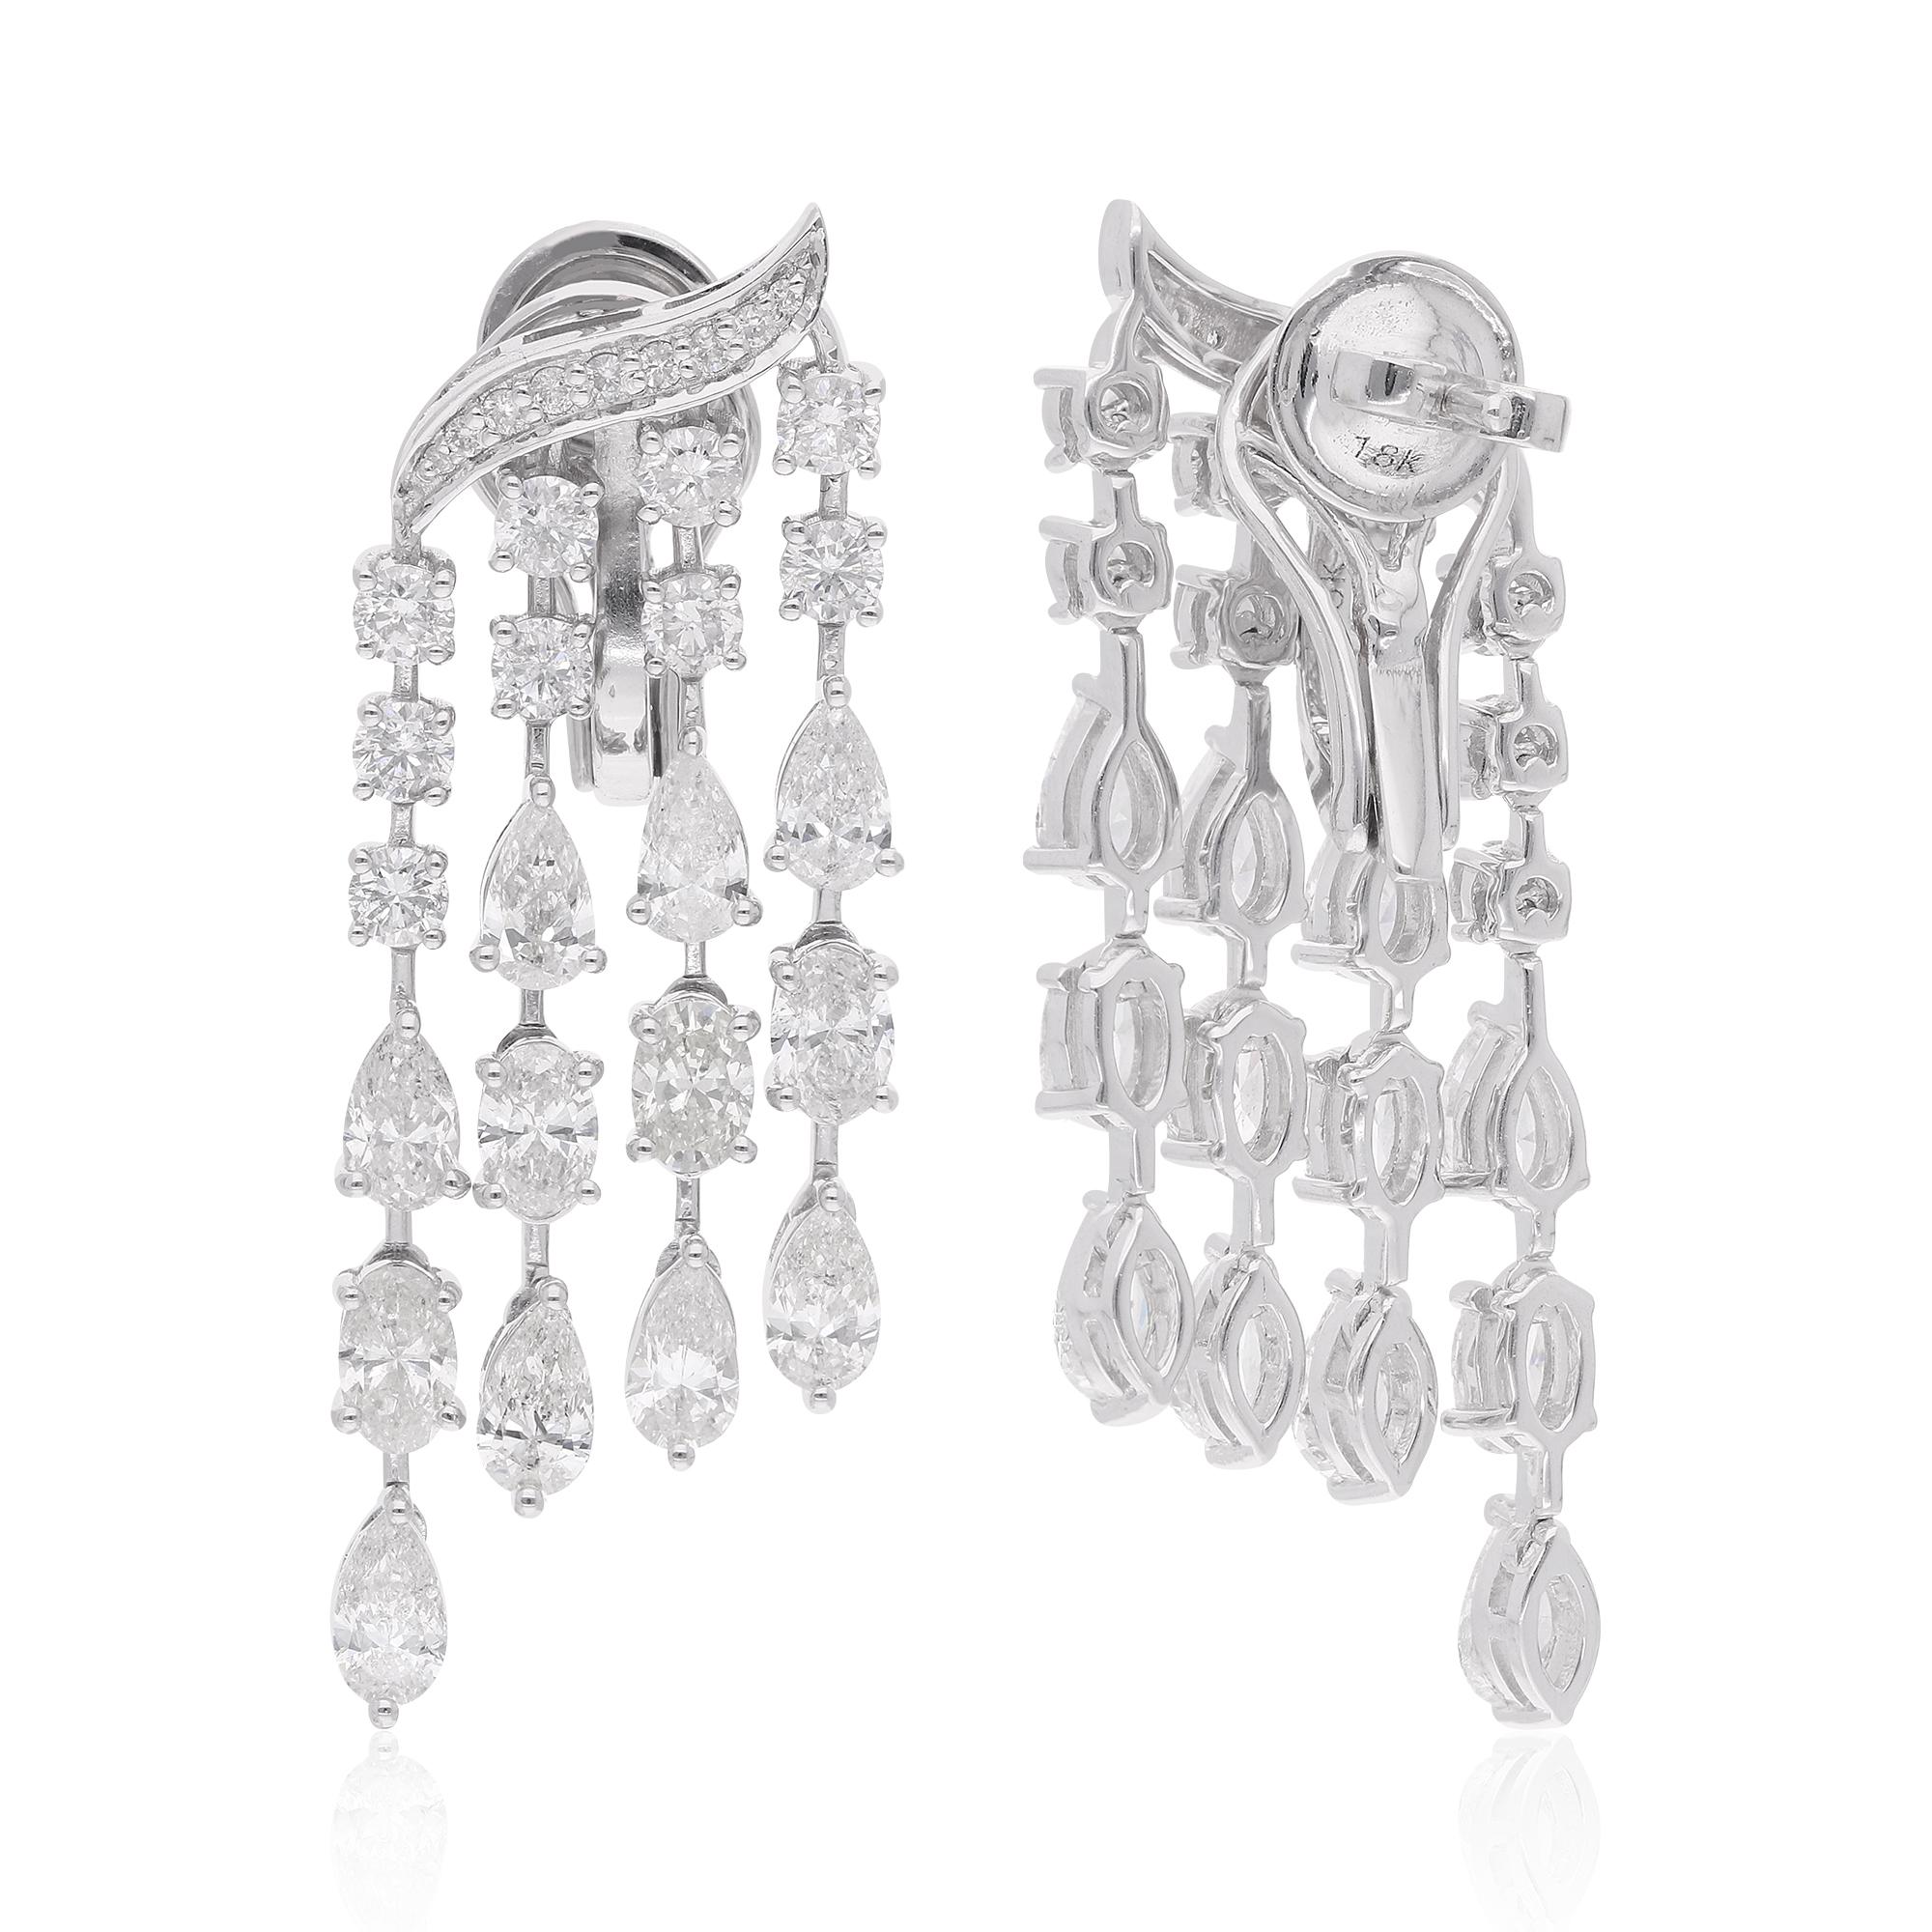 Chandelier earrings featuring pear, oval, and round diamonds in 18 karat white gold are a stunning and glamorous pair of fine jewelry. Each earring showcases a combination of pear-shaped, oval-shaped, and round diamonds.

Item Code :- SEE-14491A